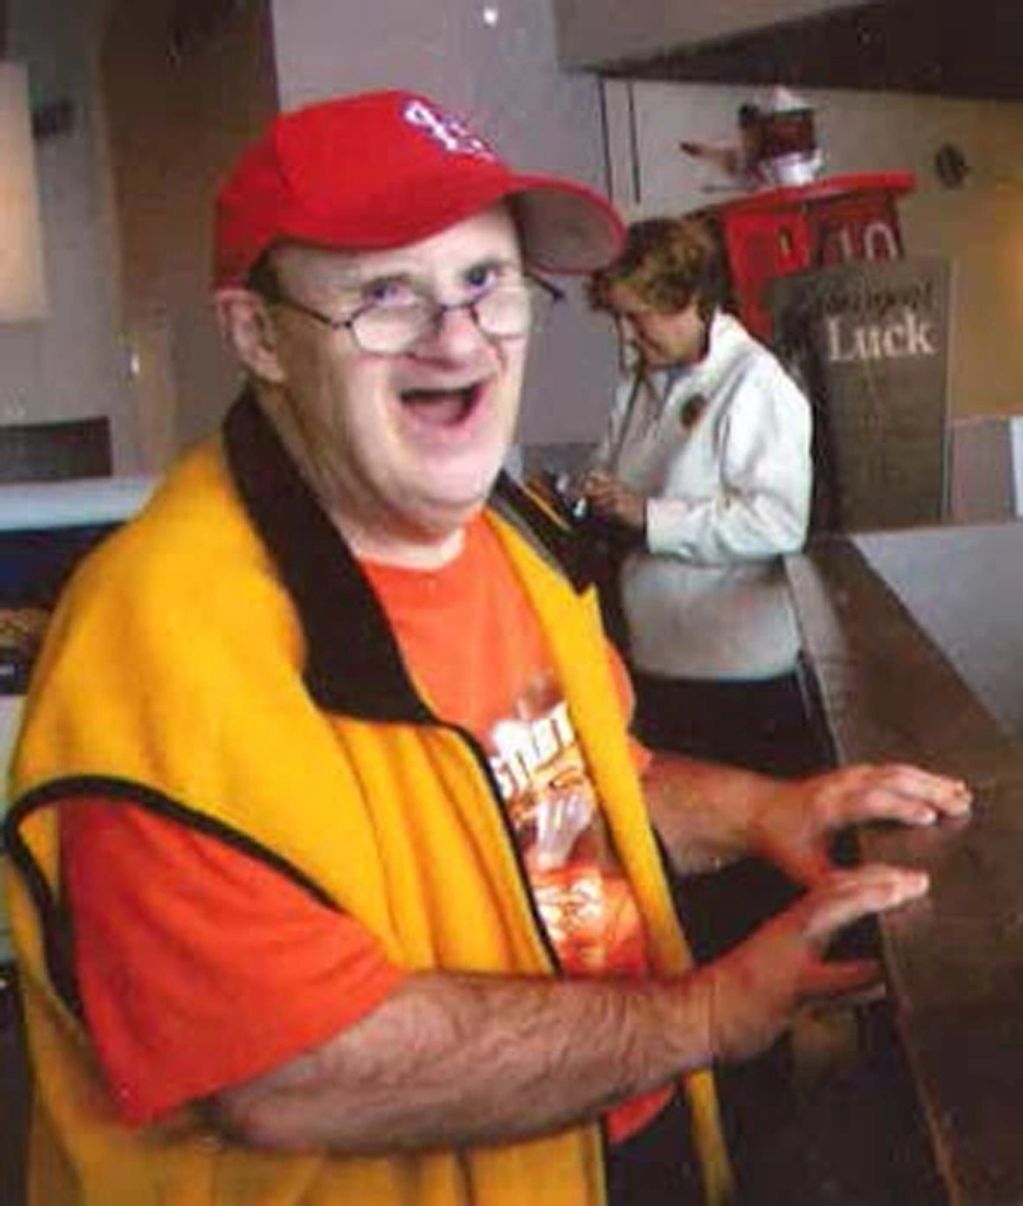 Smiling older man in a yellow vest at a counter.